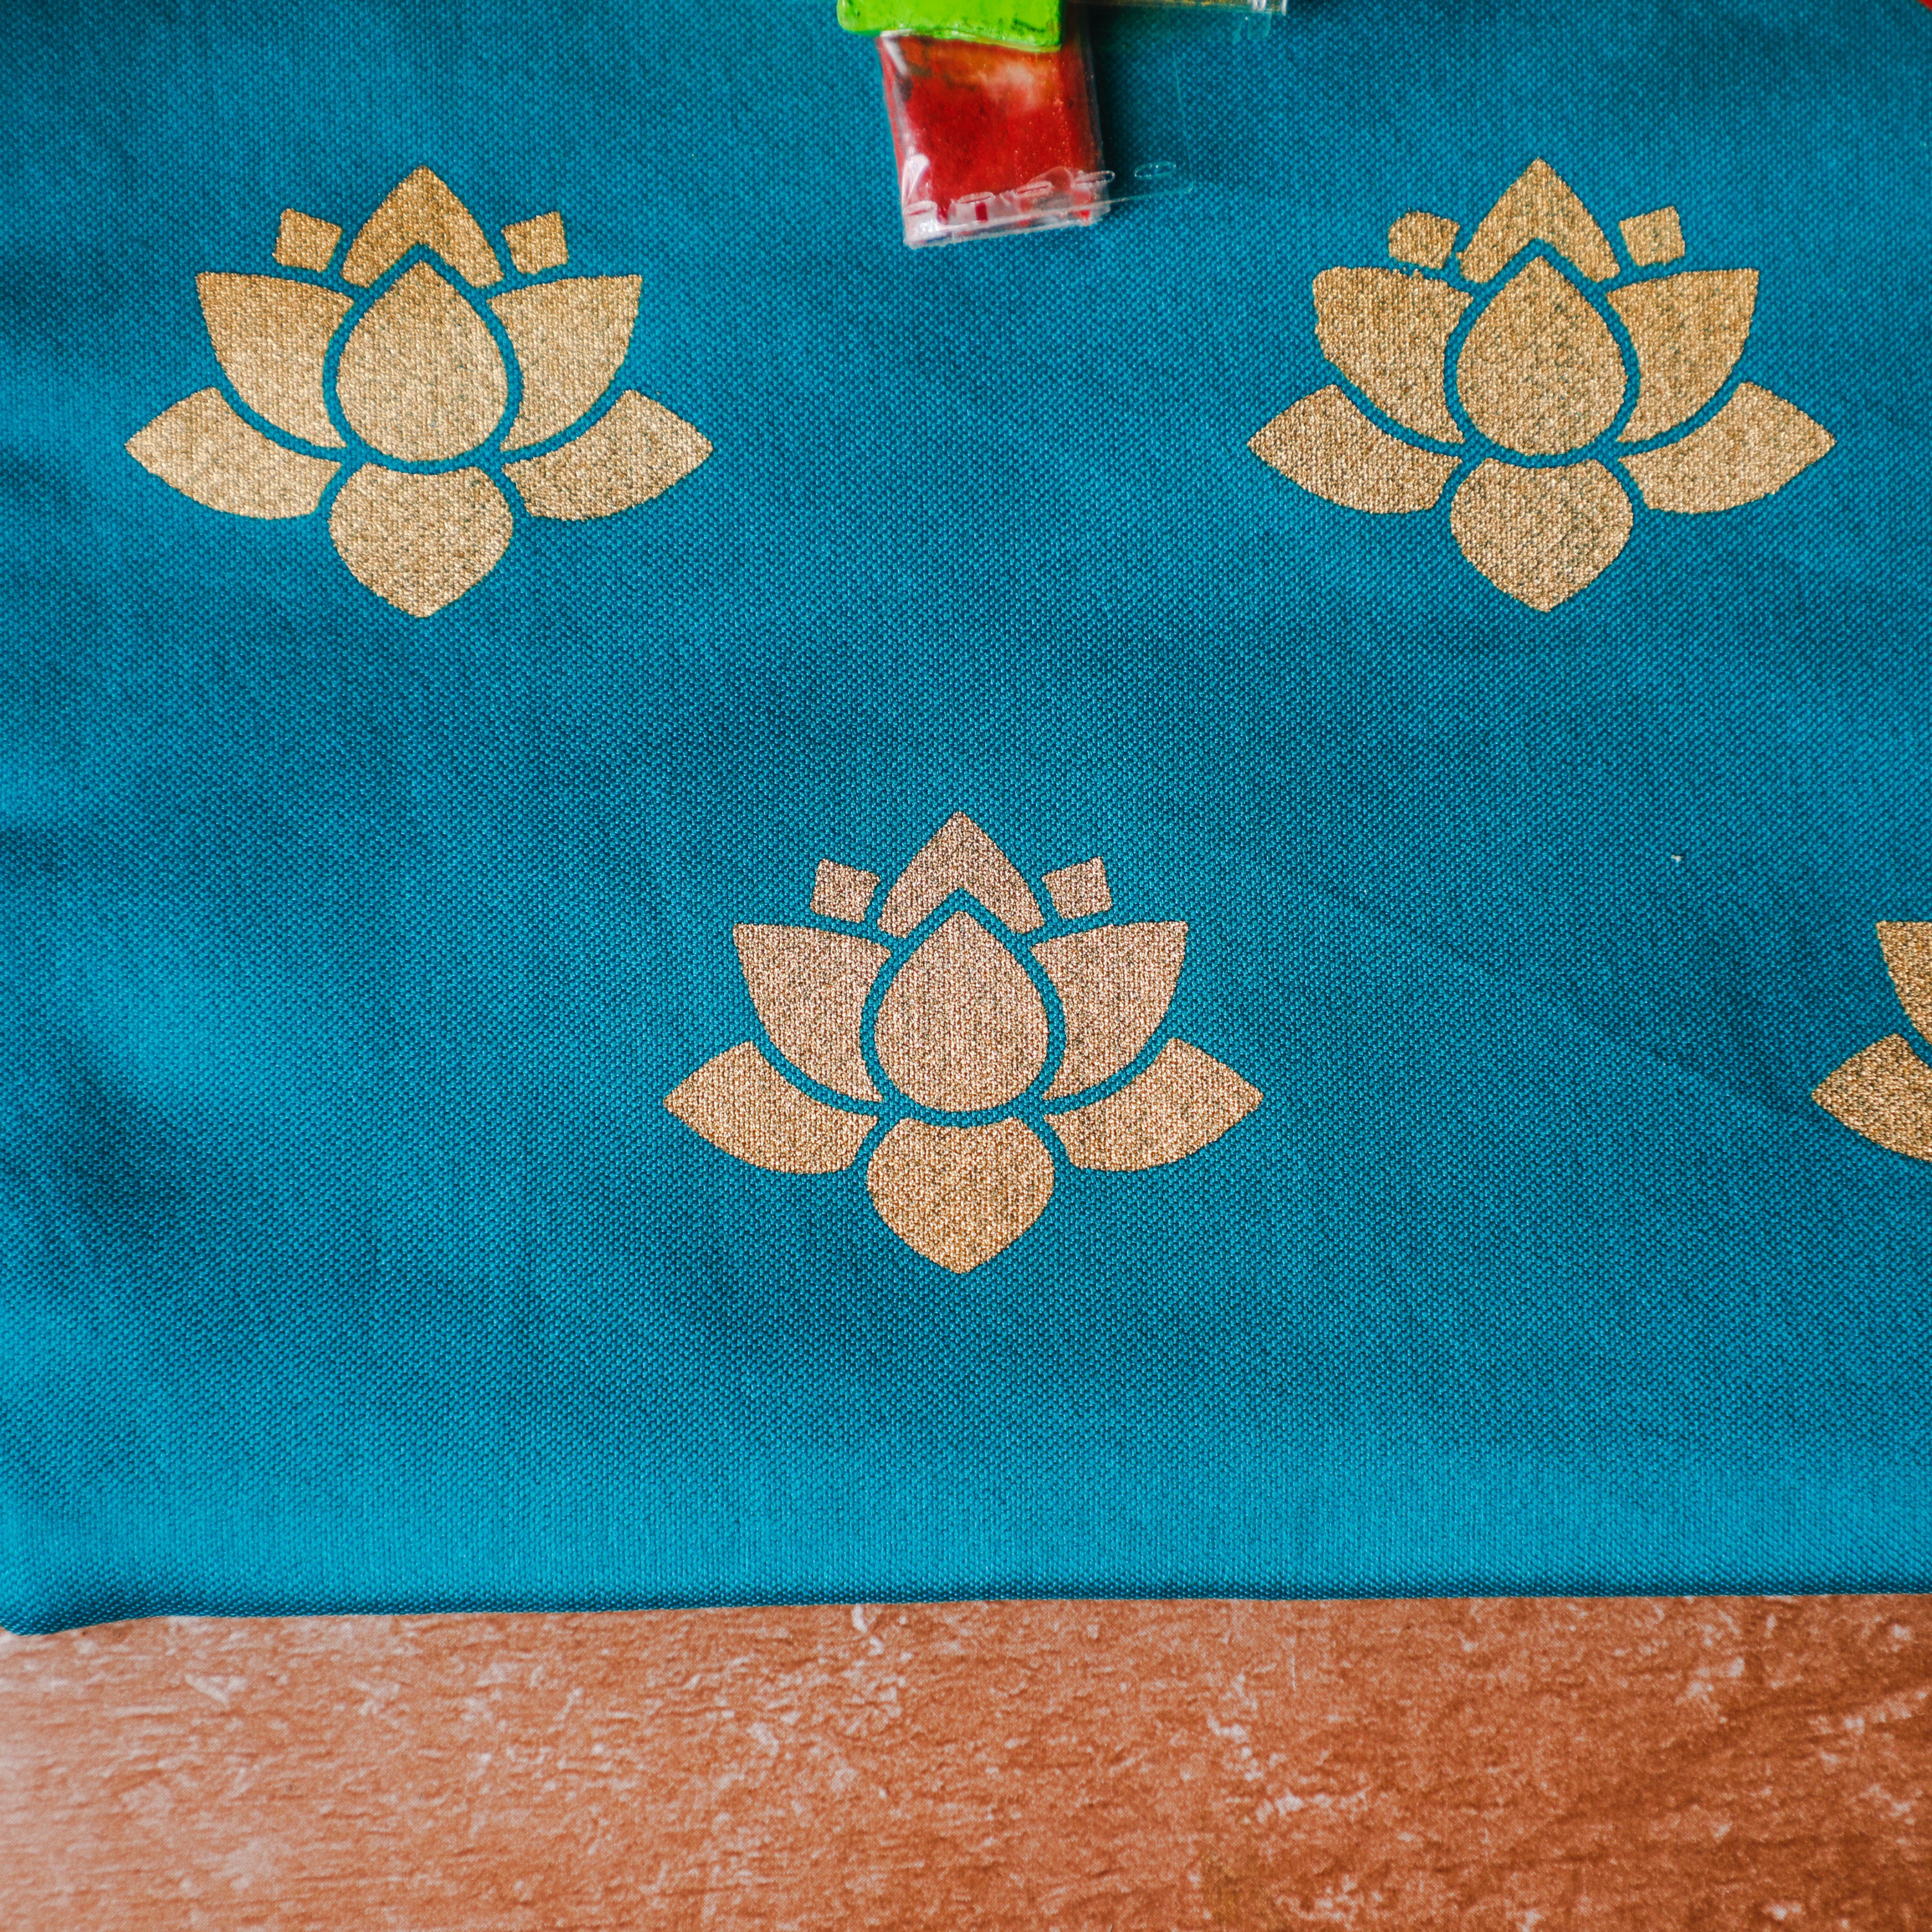 printed golden lotus design on blue pouch